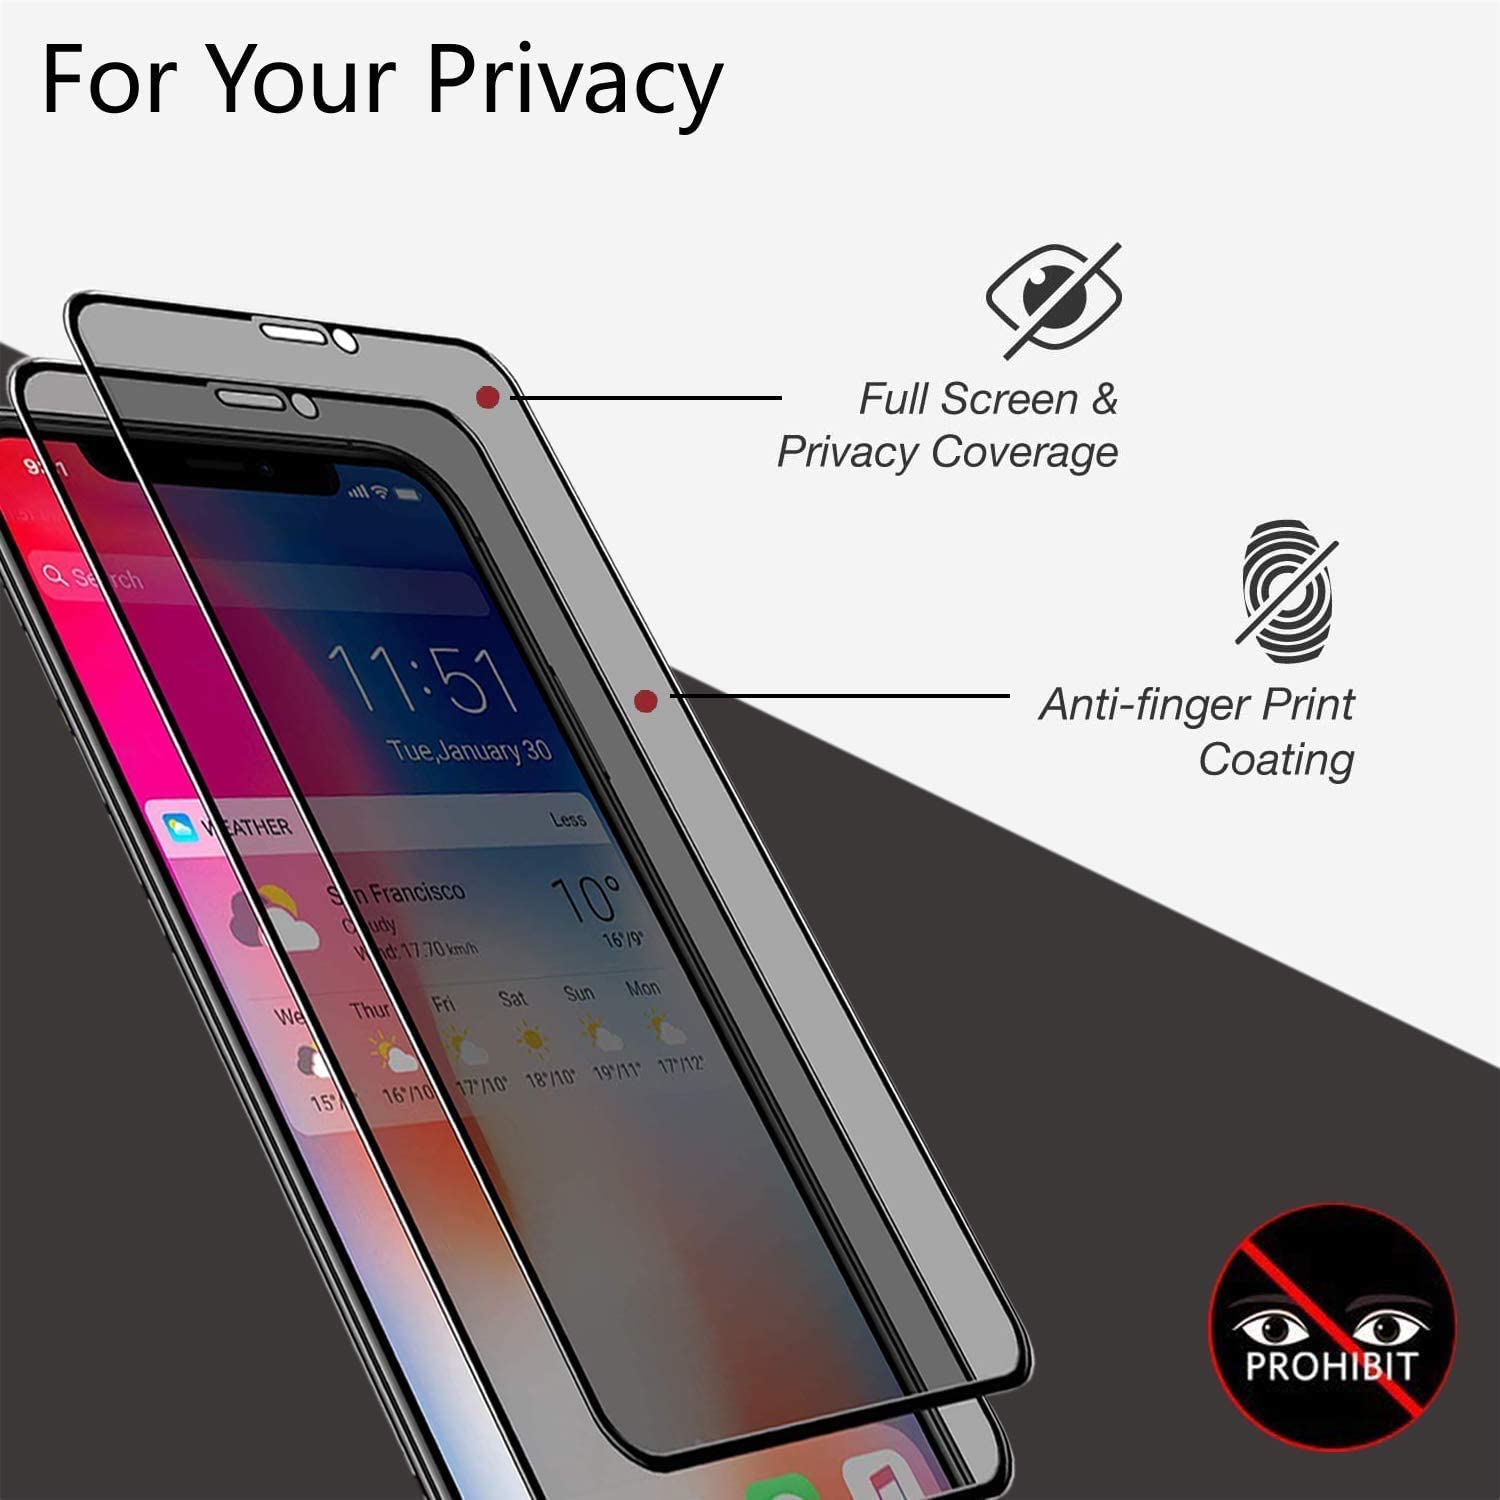 RhinoGuards 21D Privacy Screen Protector + Back Protector FREE (Buy 1 Get 1 Free)